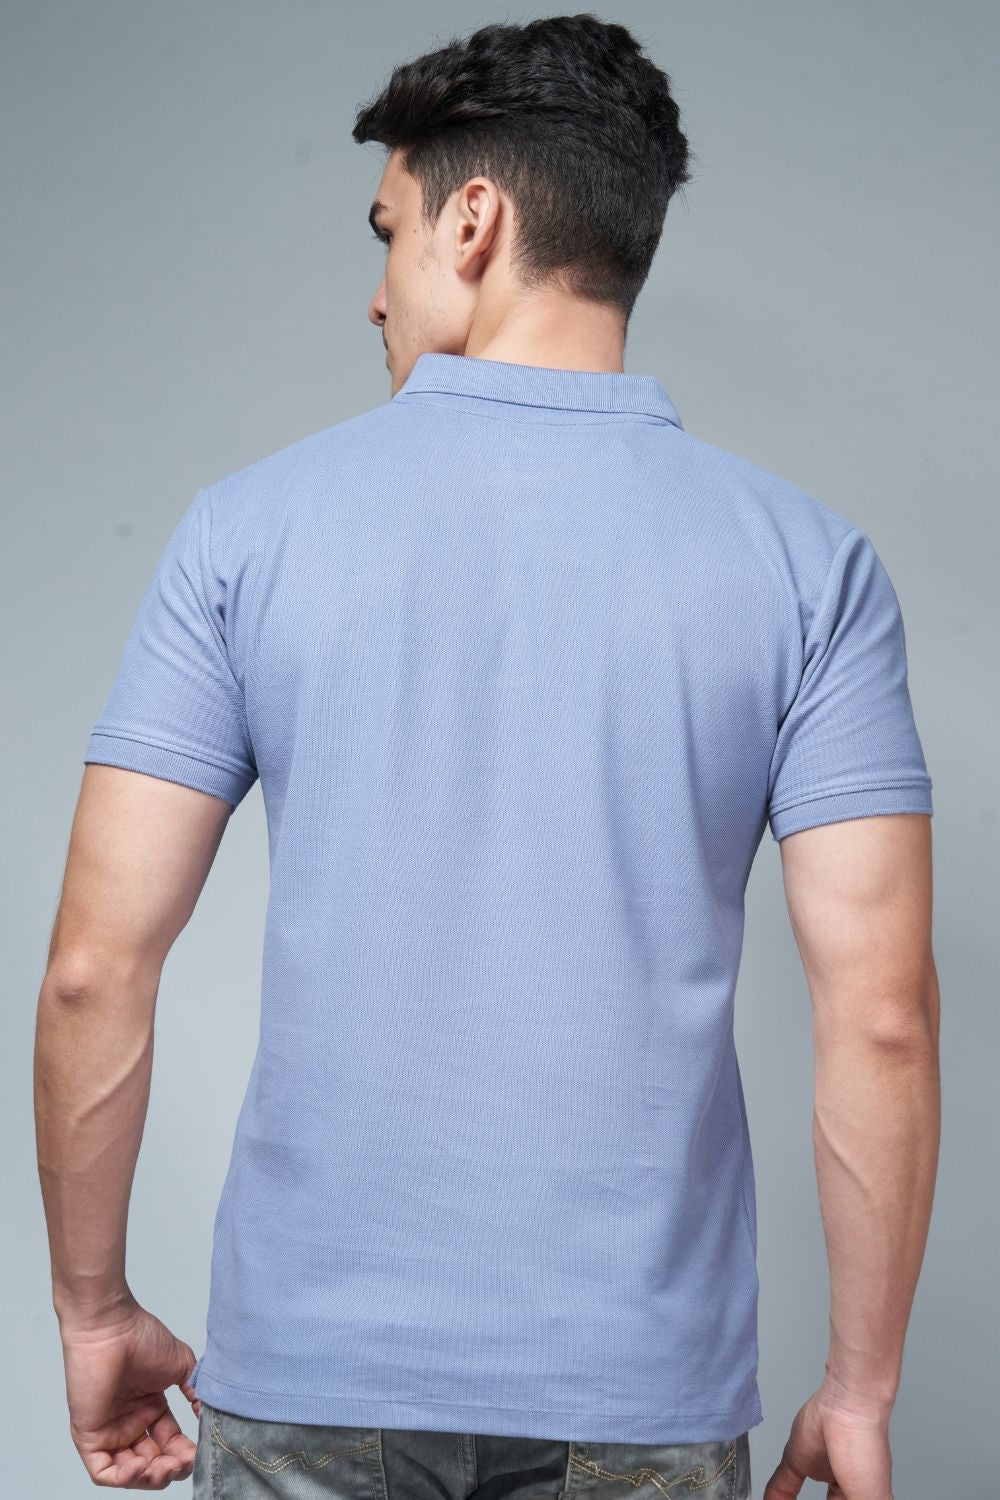 Air Blue colored, identity Polo T-shirts for men with collar and half sleeves, back view.